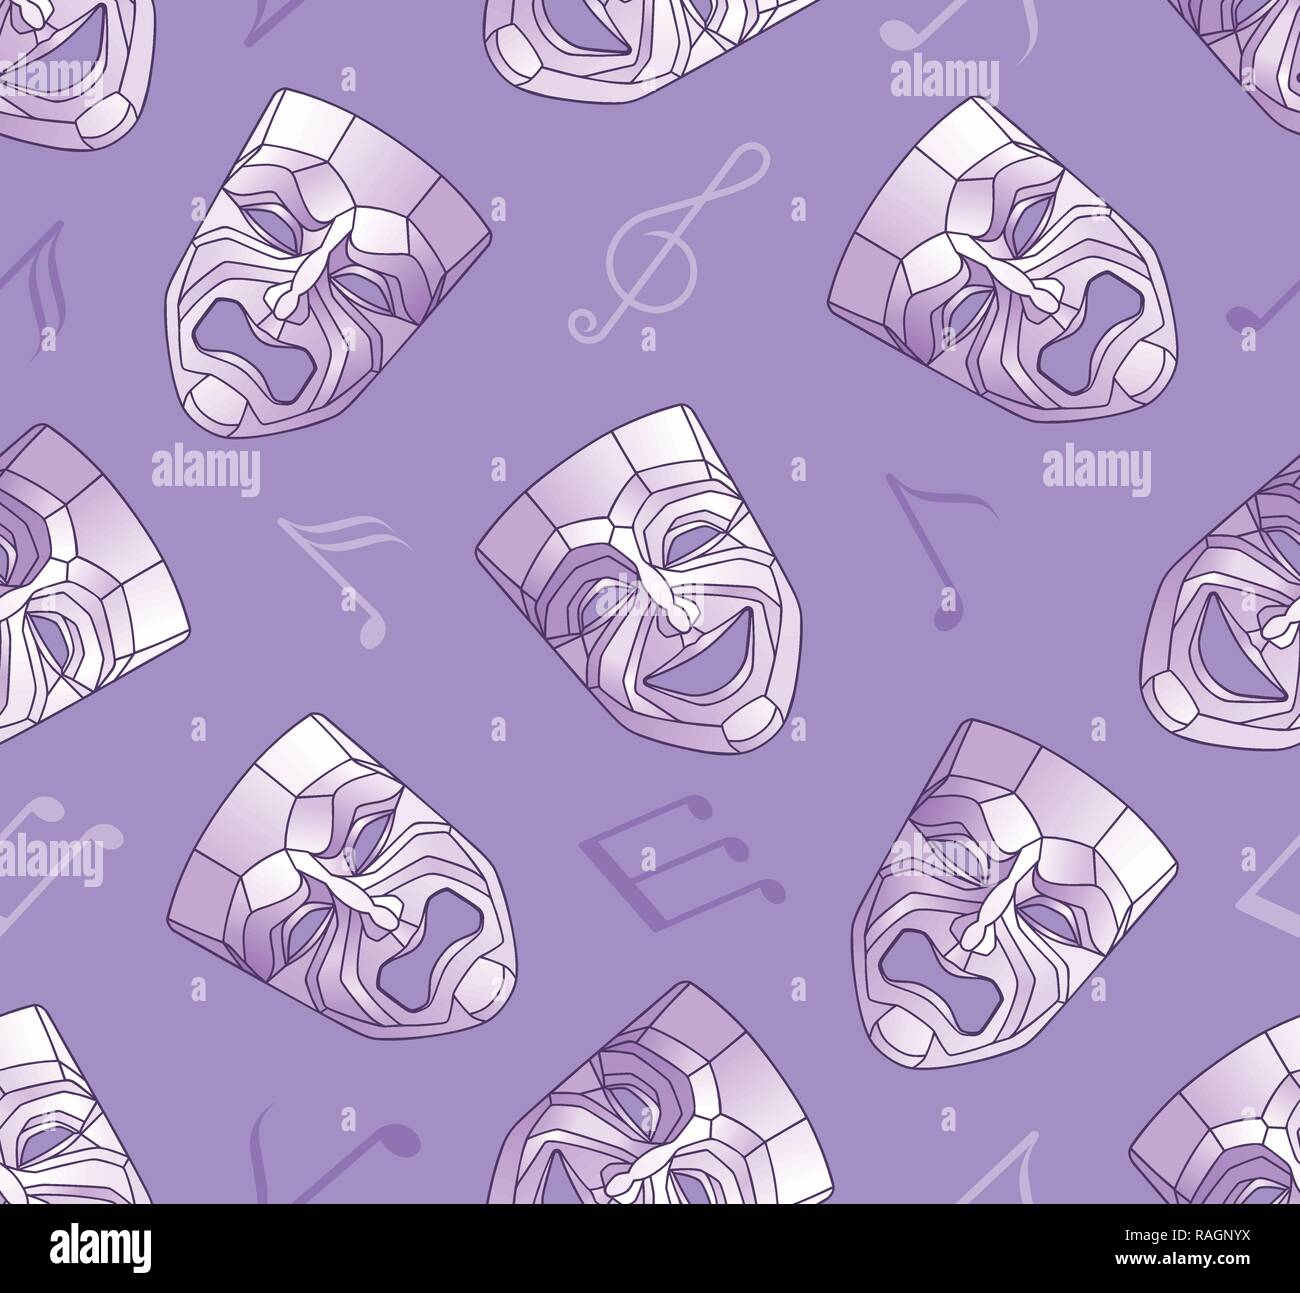 Theatrical Graphic Seamless Pattern Stock Vector